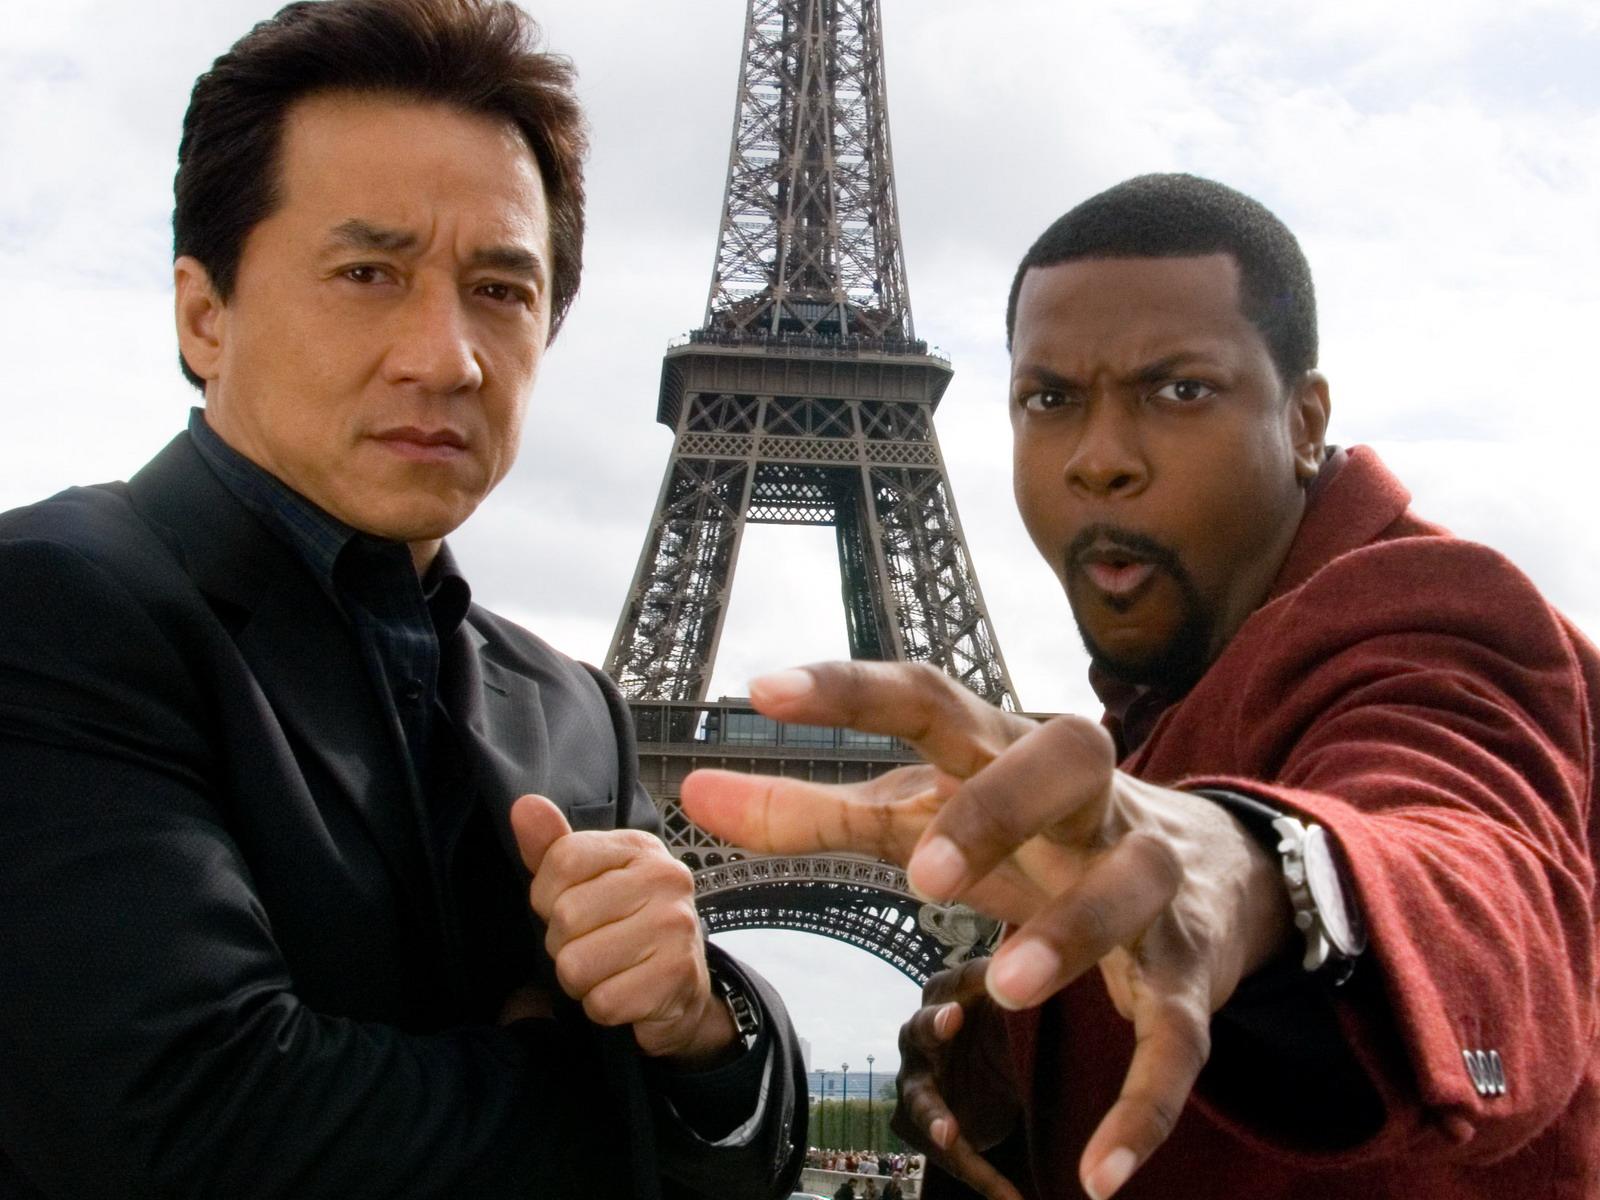 Rush Hour 3 wallpaper and image, picture, photo